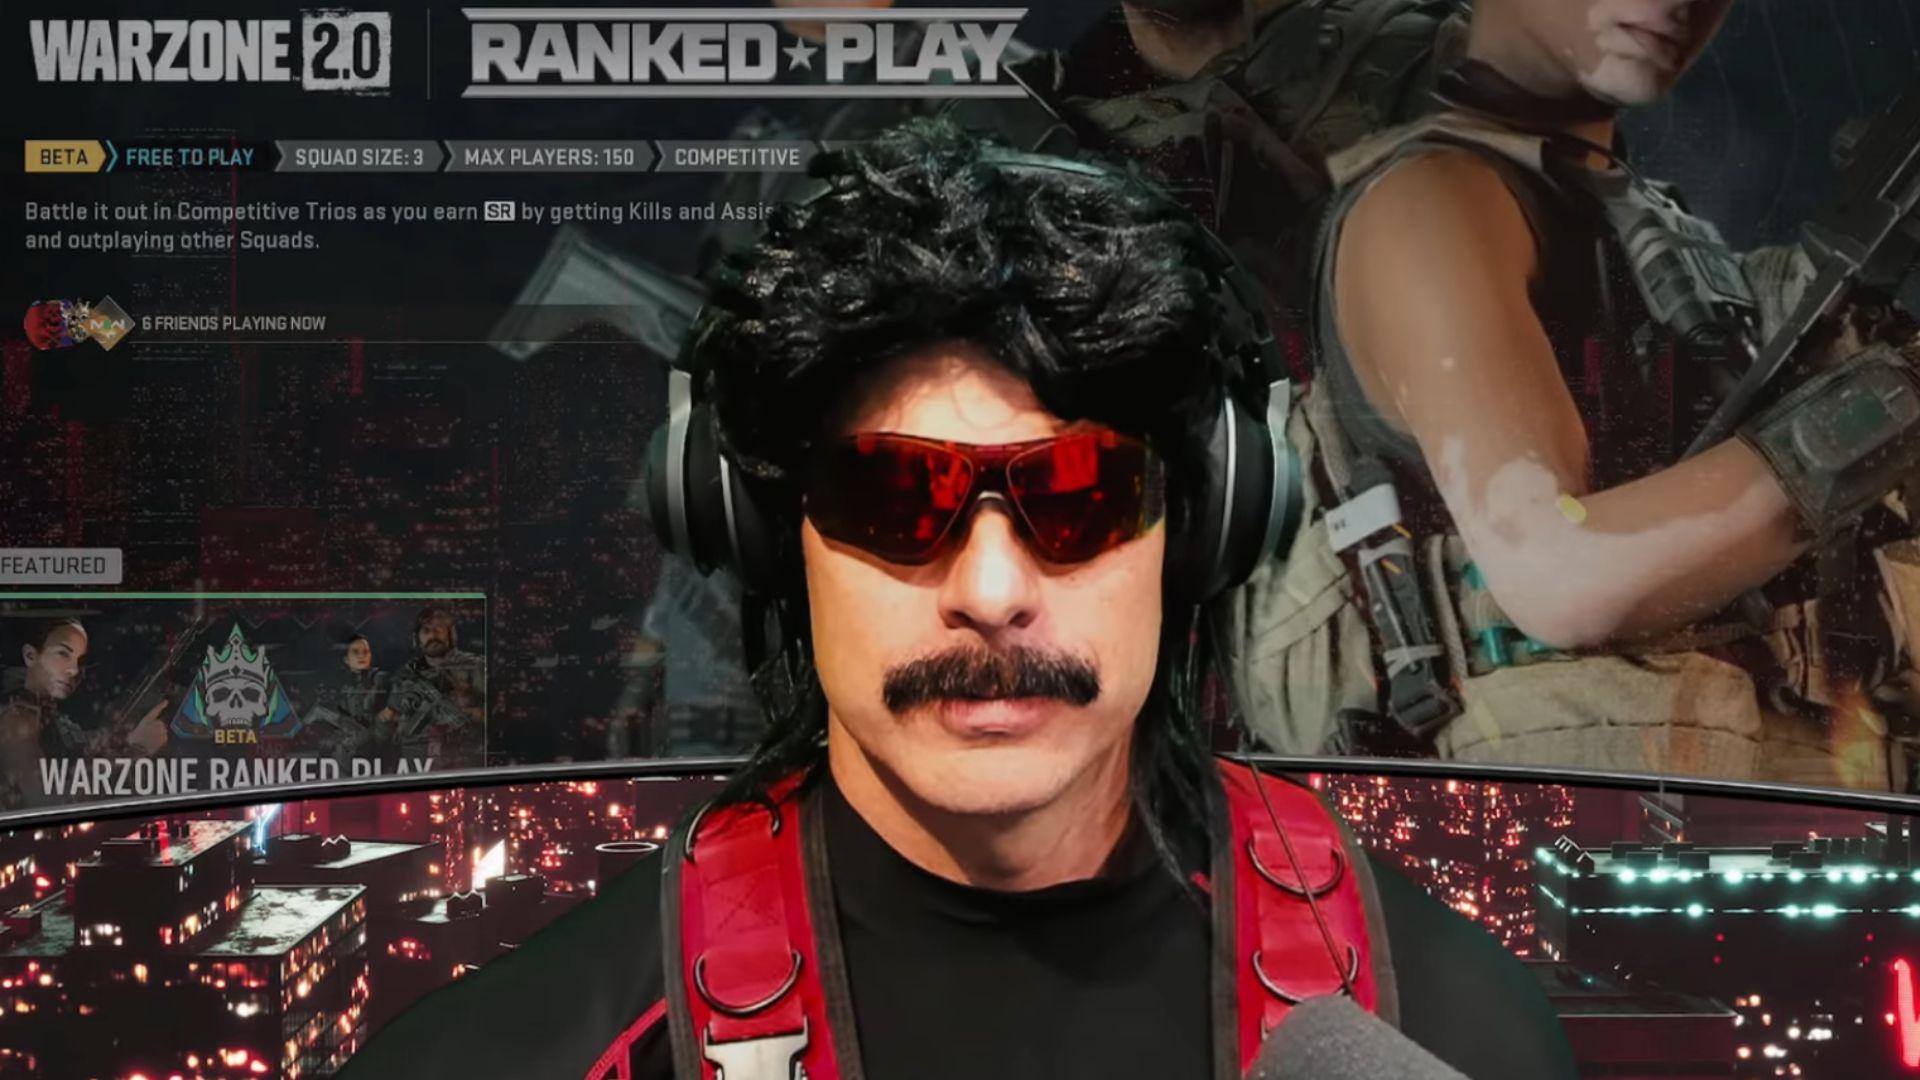 Dr Disrespect sat in front of Warzone 2 ranked play screen